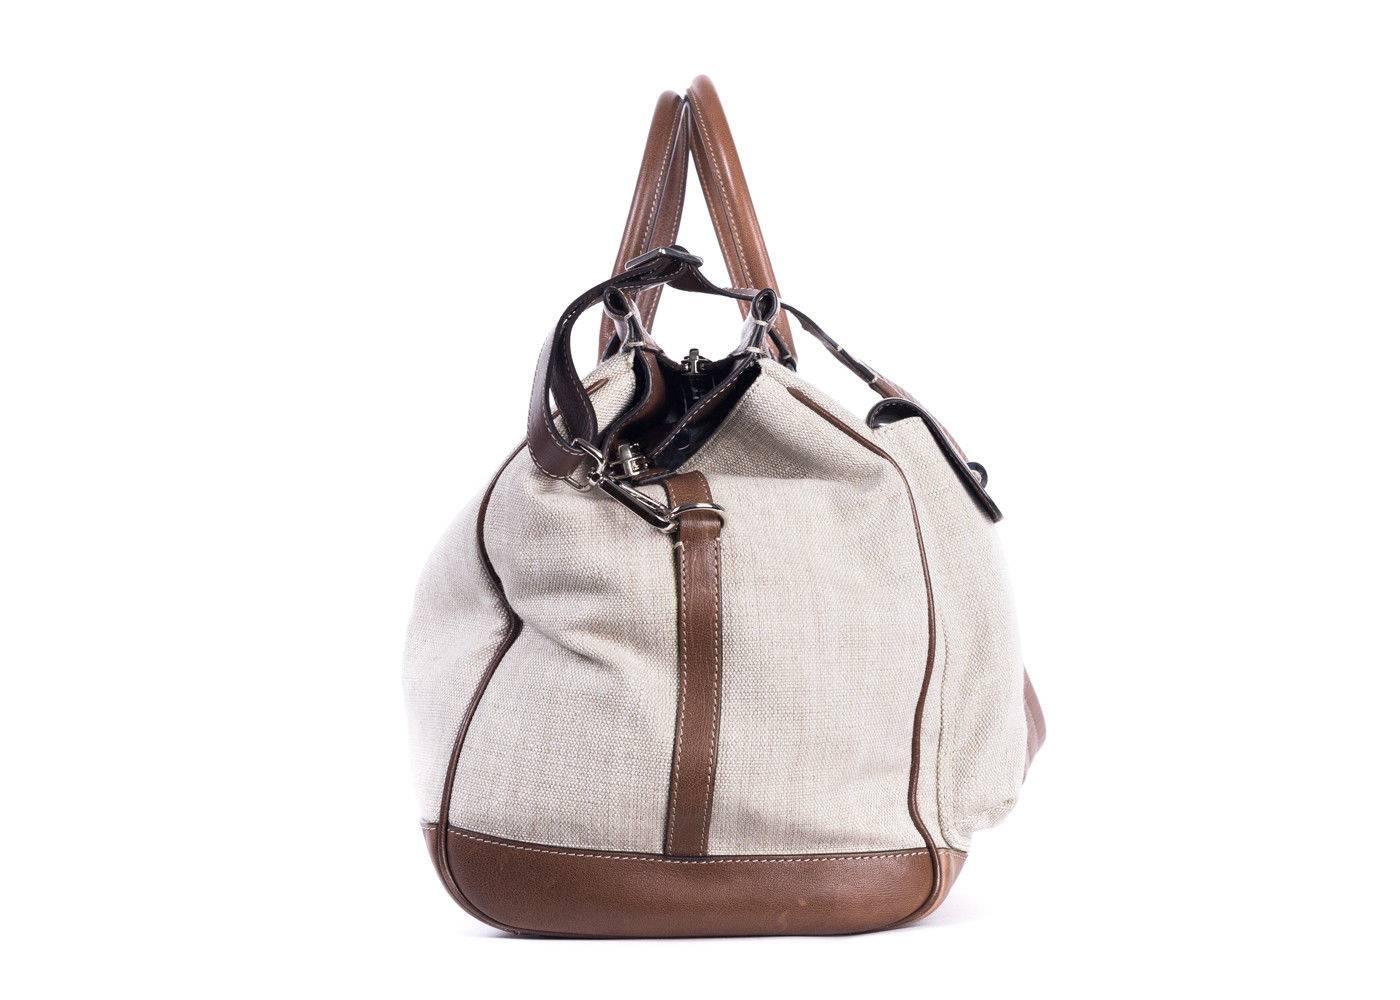 Brand New Brunello Cucinelli Duffel Bag
Dust Bag Included
Retails in Stores & Online for $3300 
Dimensions: 21